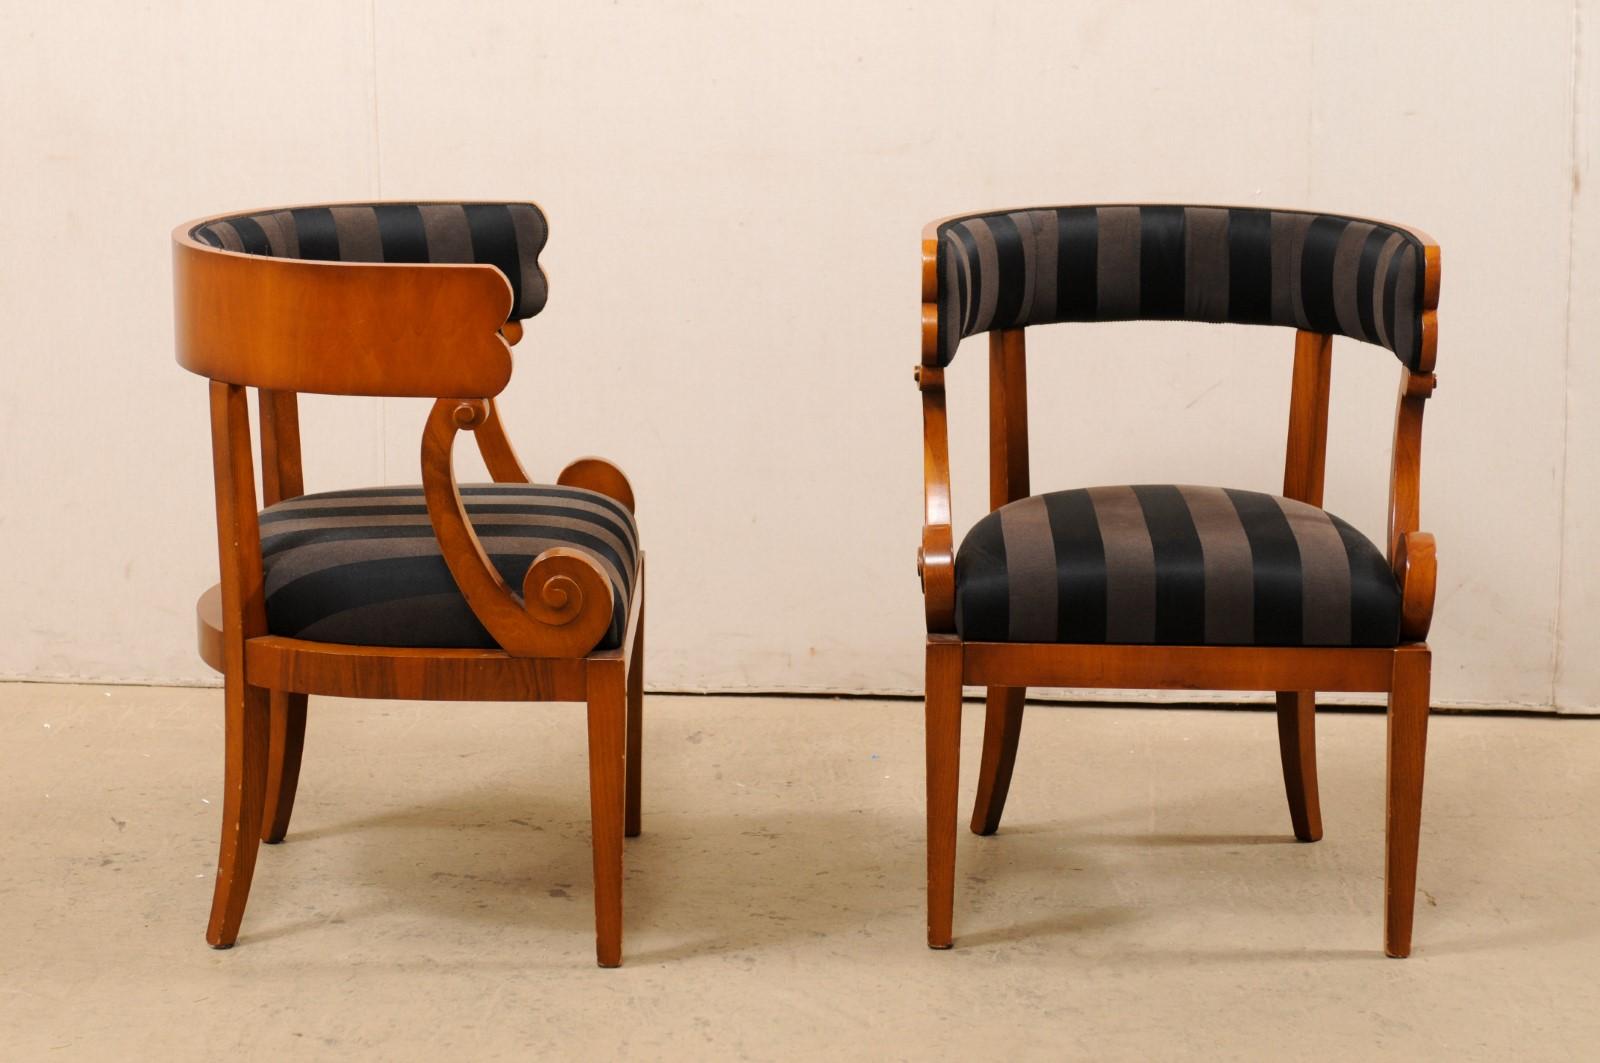 20th Century Italian Pair of Barrel Back Chairs with Beautiful Volute-Carved Arm Supports